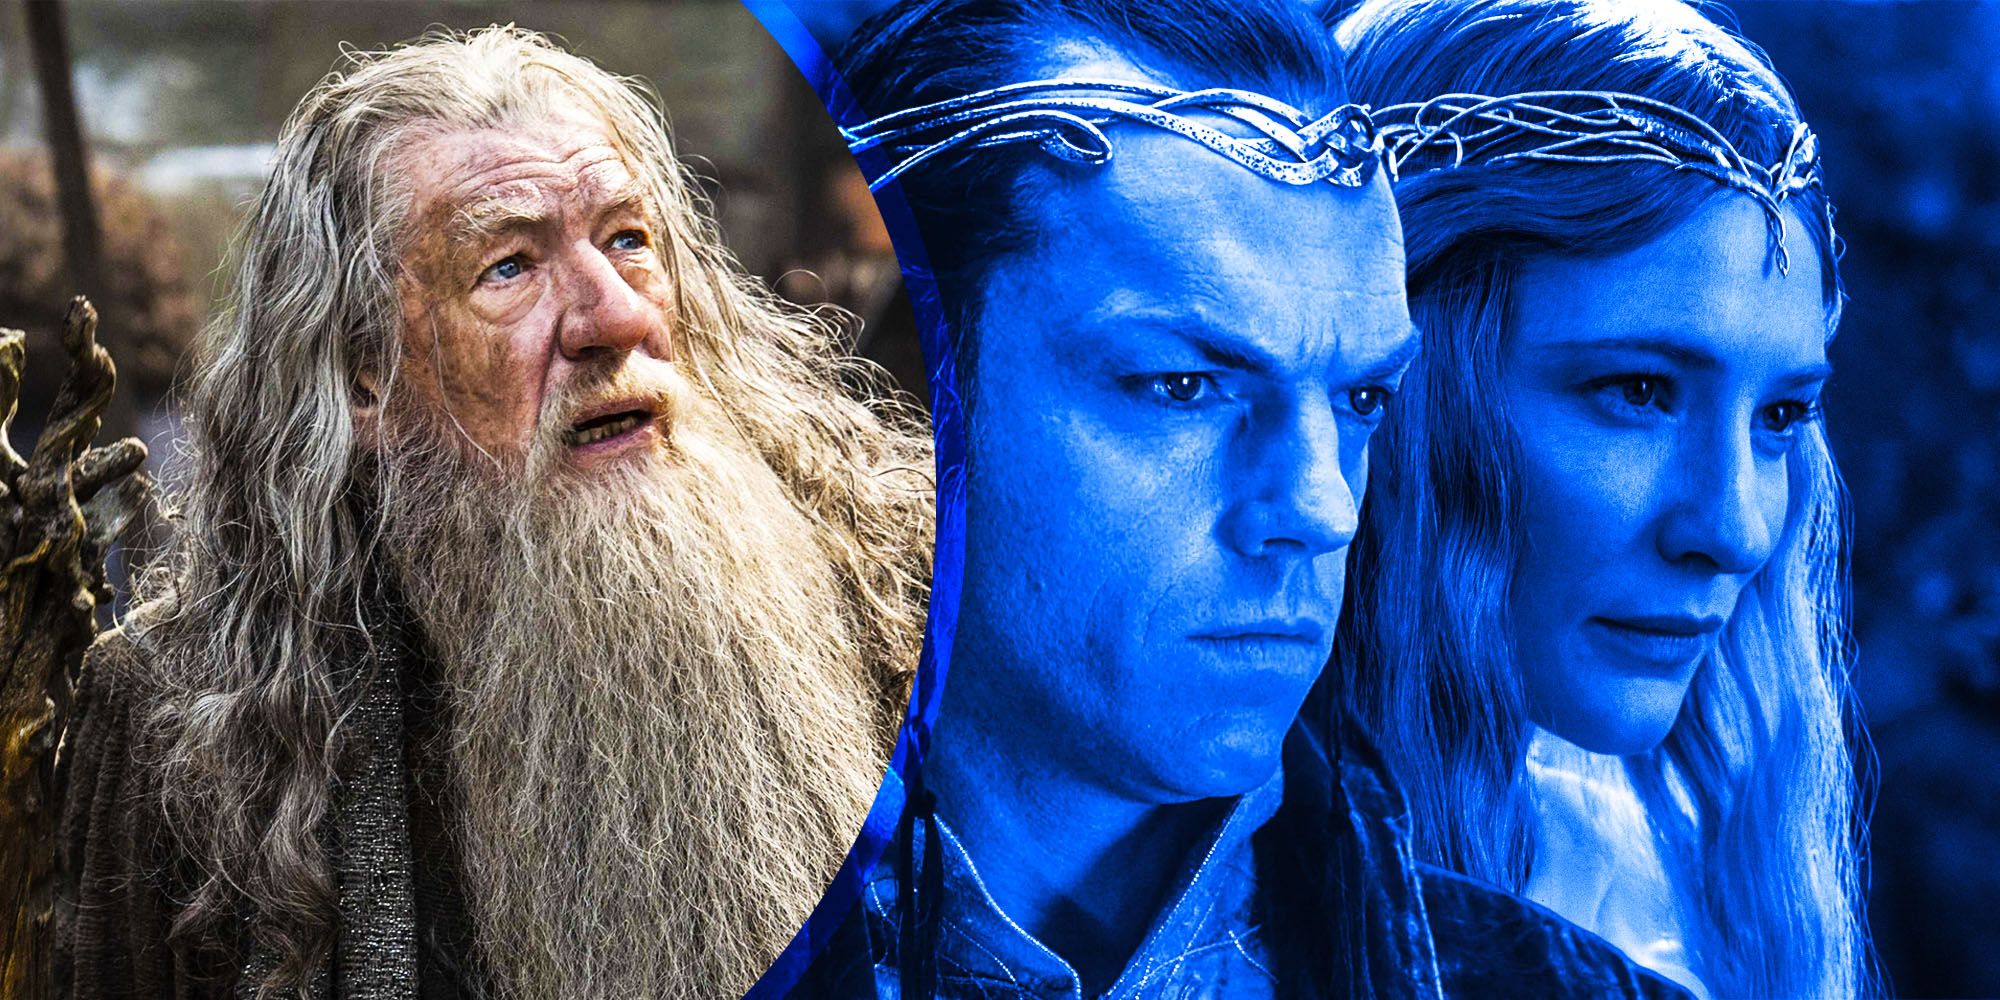 How powerful is Gandalf compared to Lord of the rings Elves Elrond Galadriel